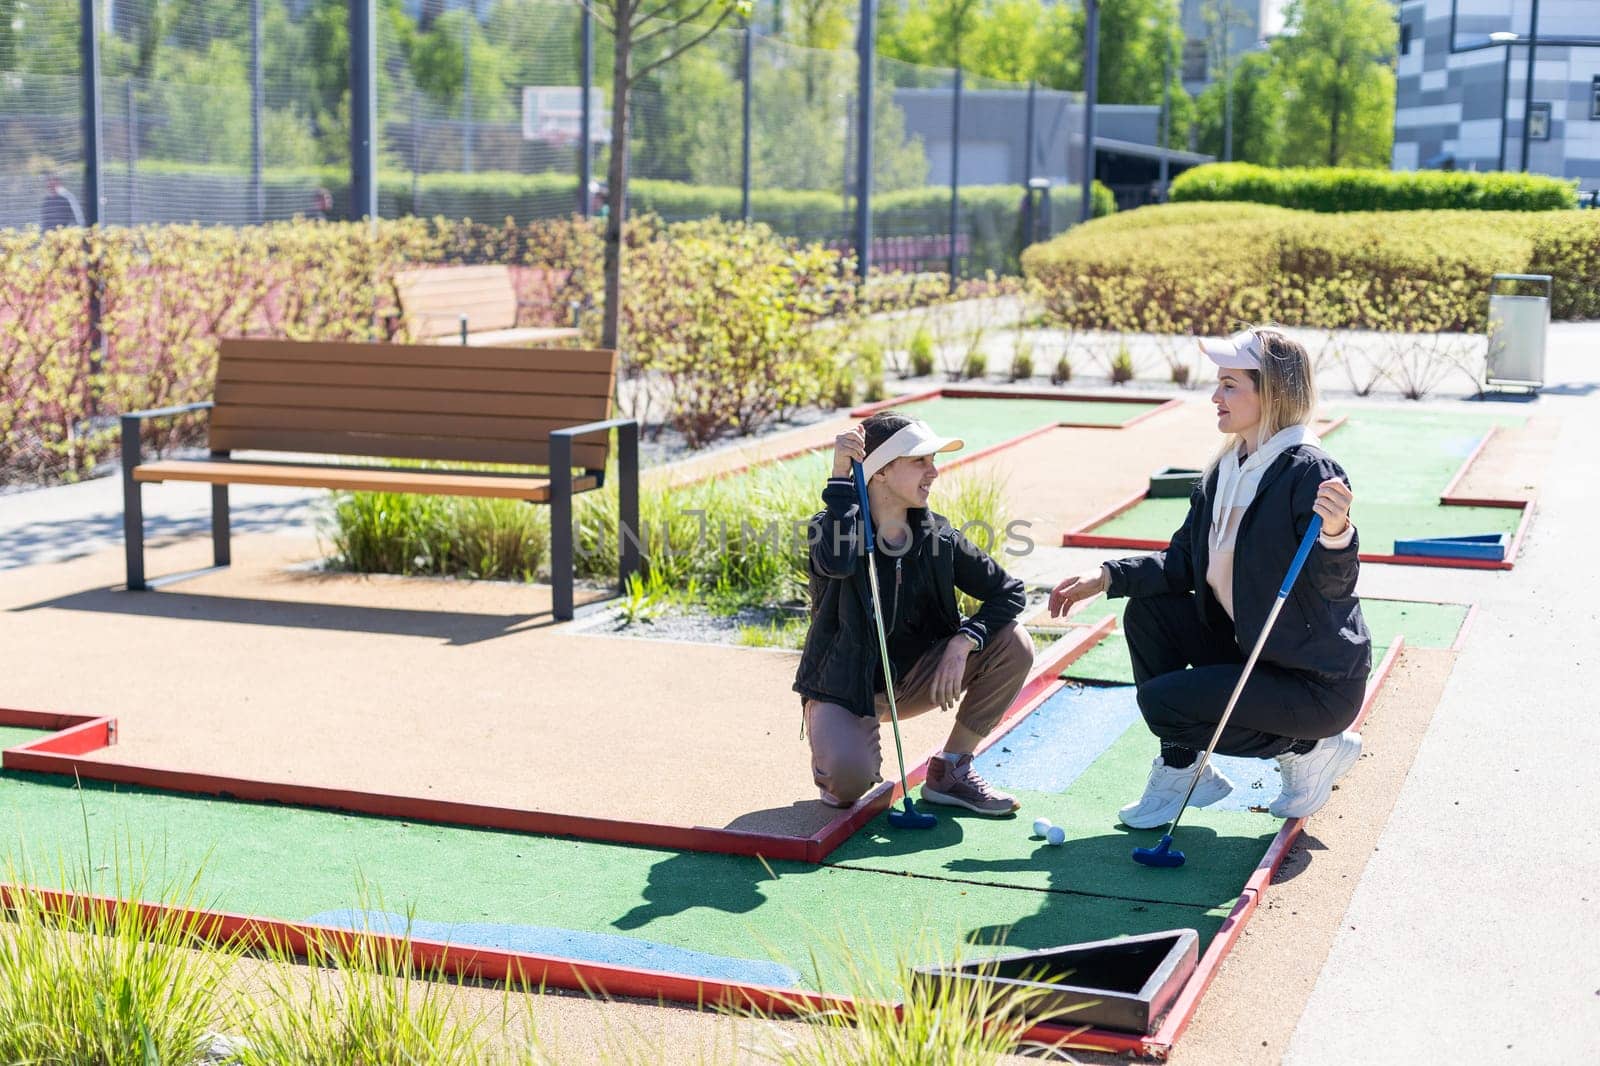 little girl and mother playing mini golf. High quality photo